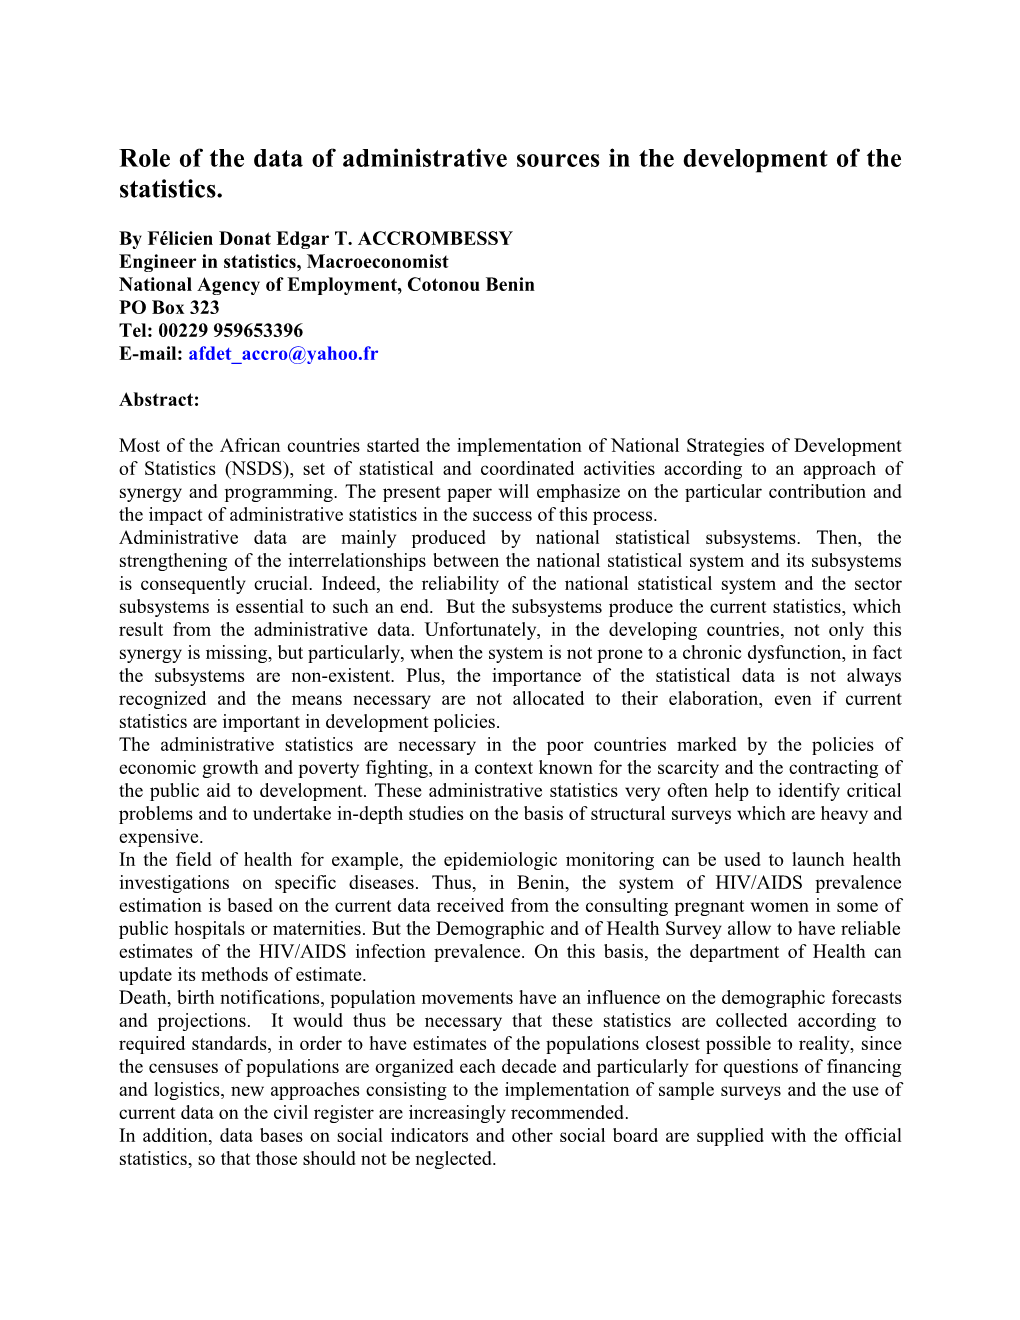 Role of the Data of Administrative Sources in the Development of the Statistics